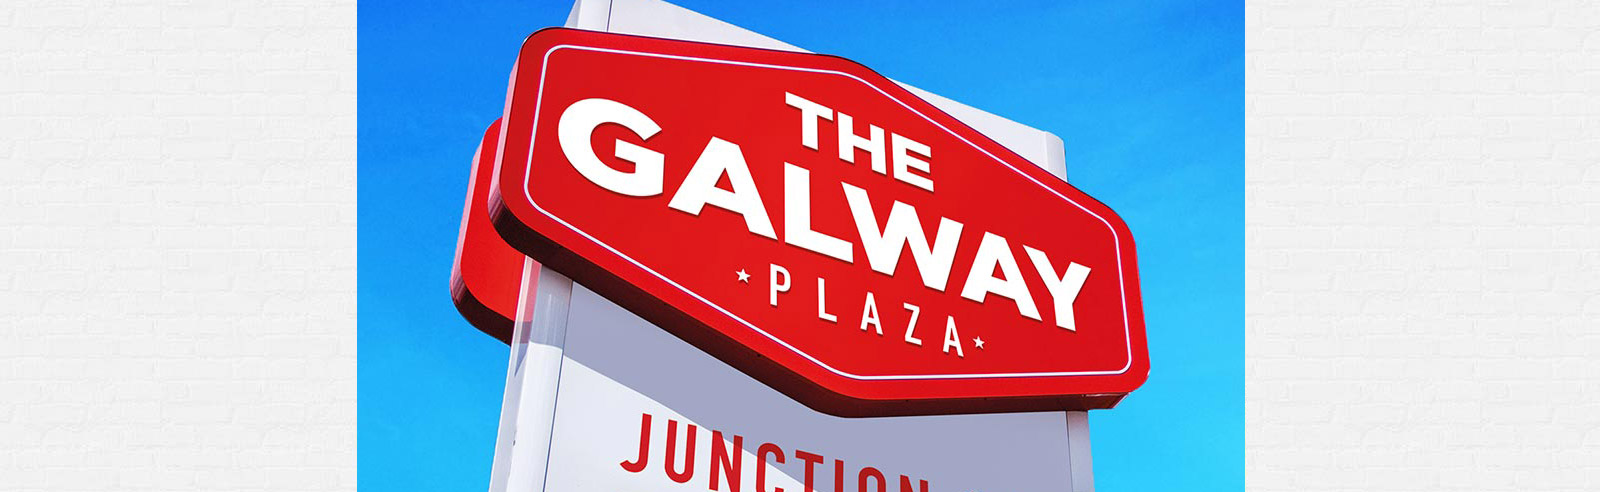 Video: The Galway Plaza Opening